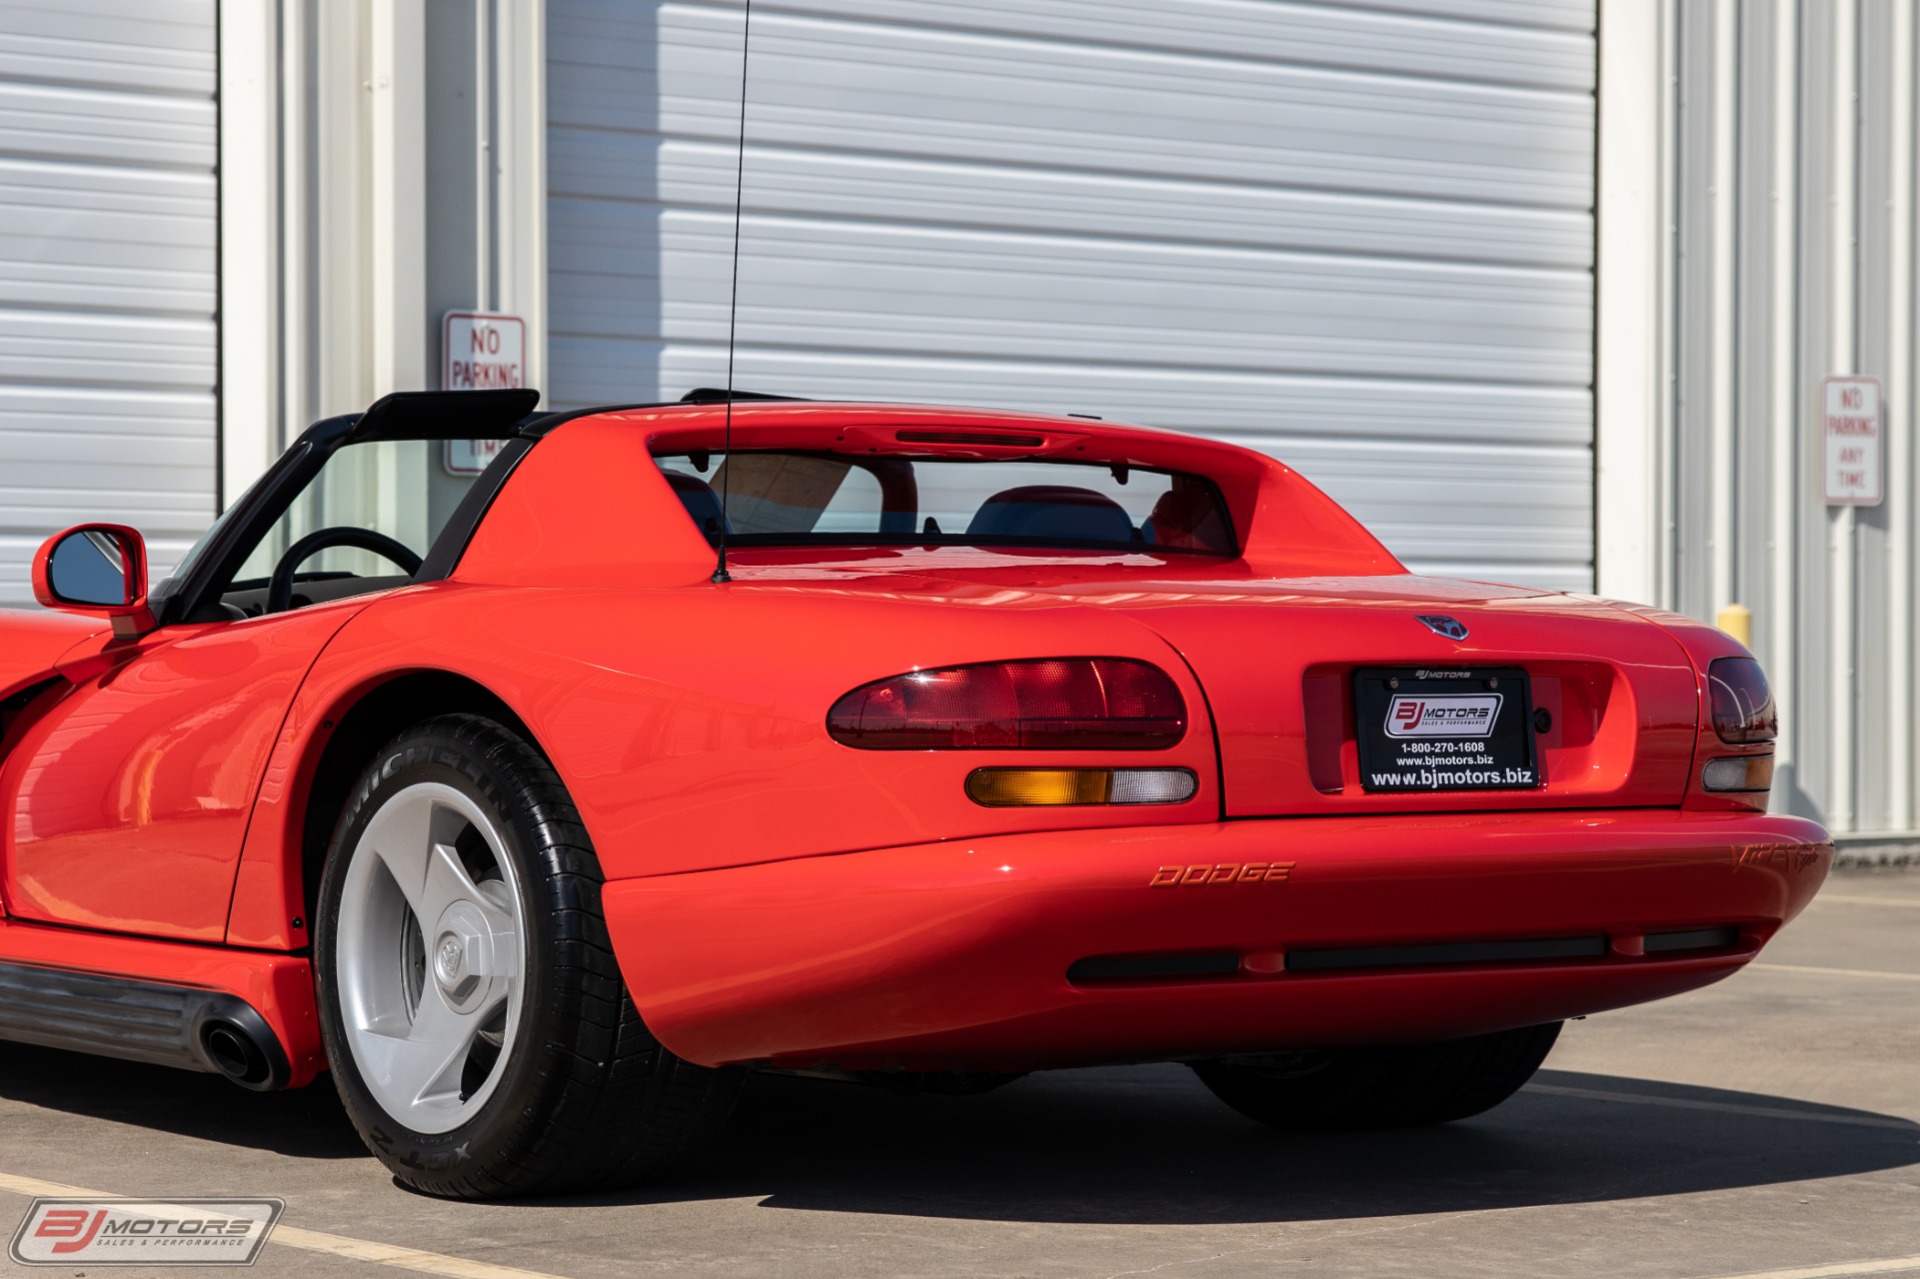 Used-1992-Dodge-Viper-RT/10-with-83-miles